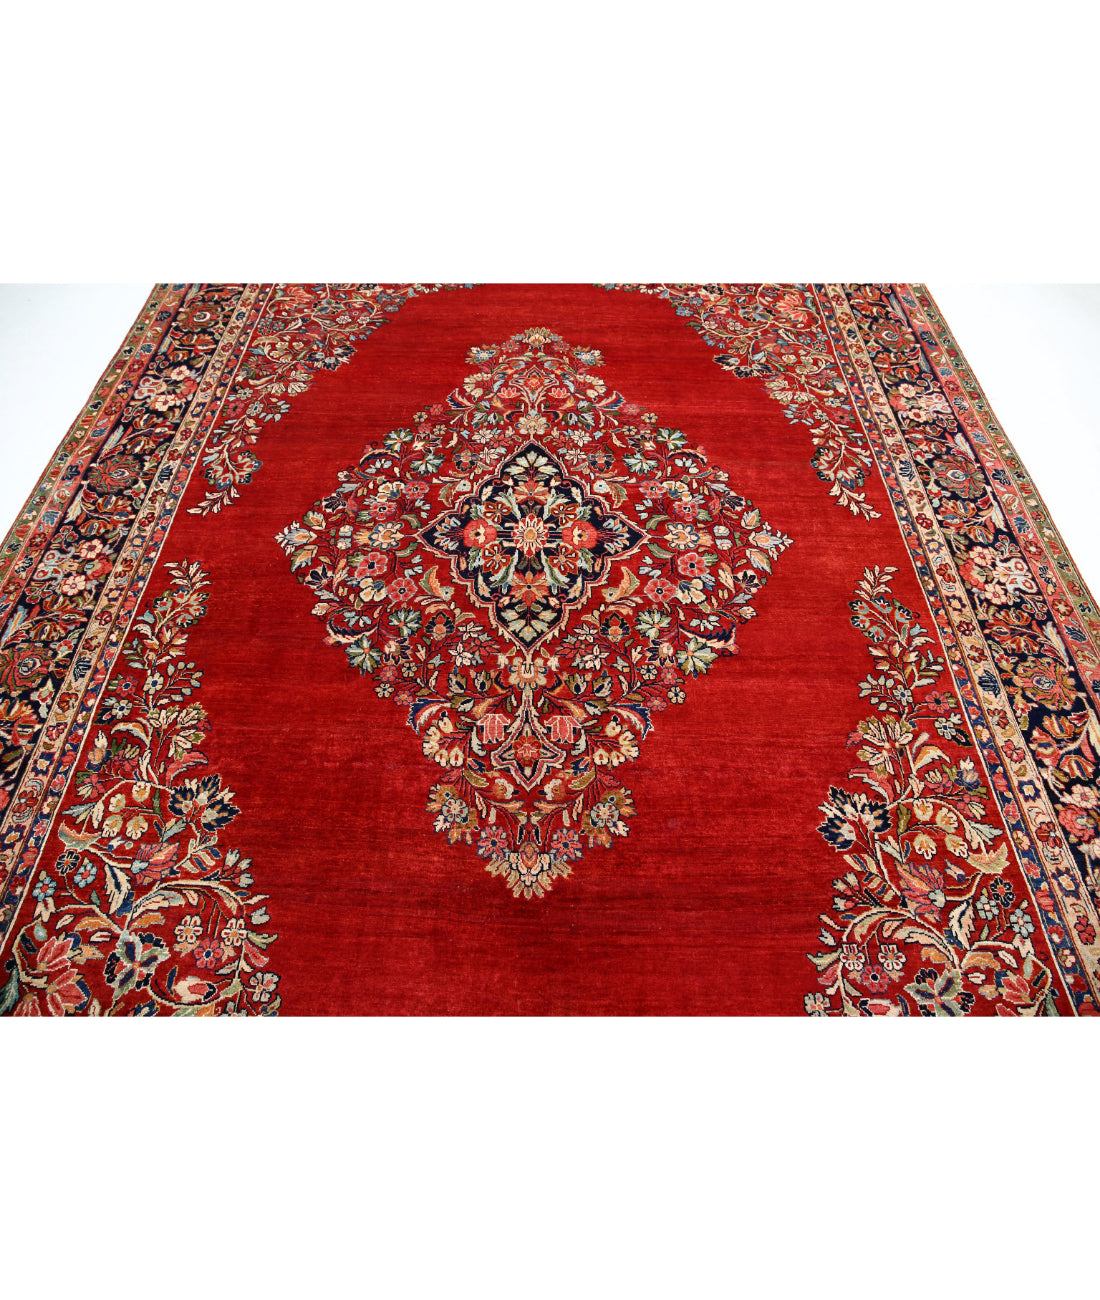 Hand Knotted Persian Kerman Wool Rug - 8'4'' x 11'4'' 8'4'' x 11'4'' (250 X 340) / Red / Blue